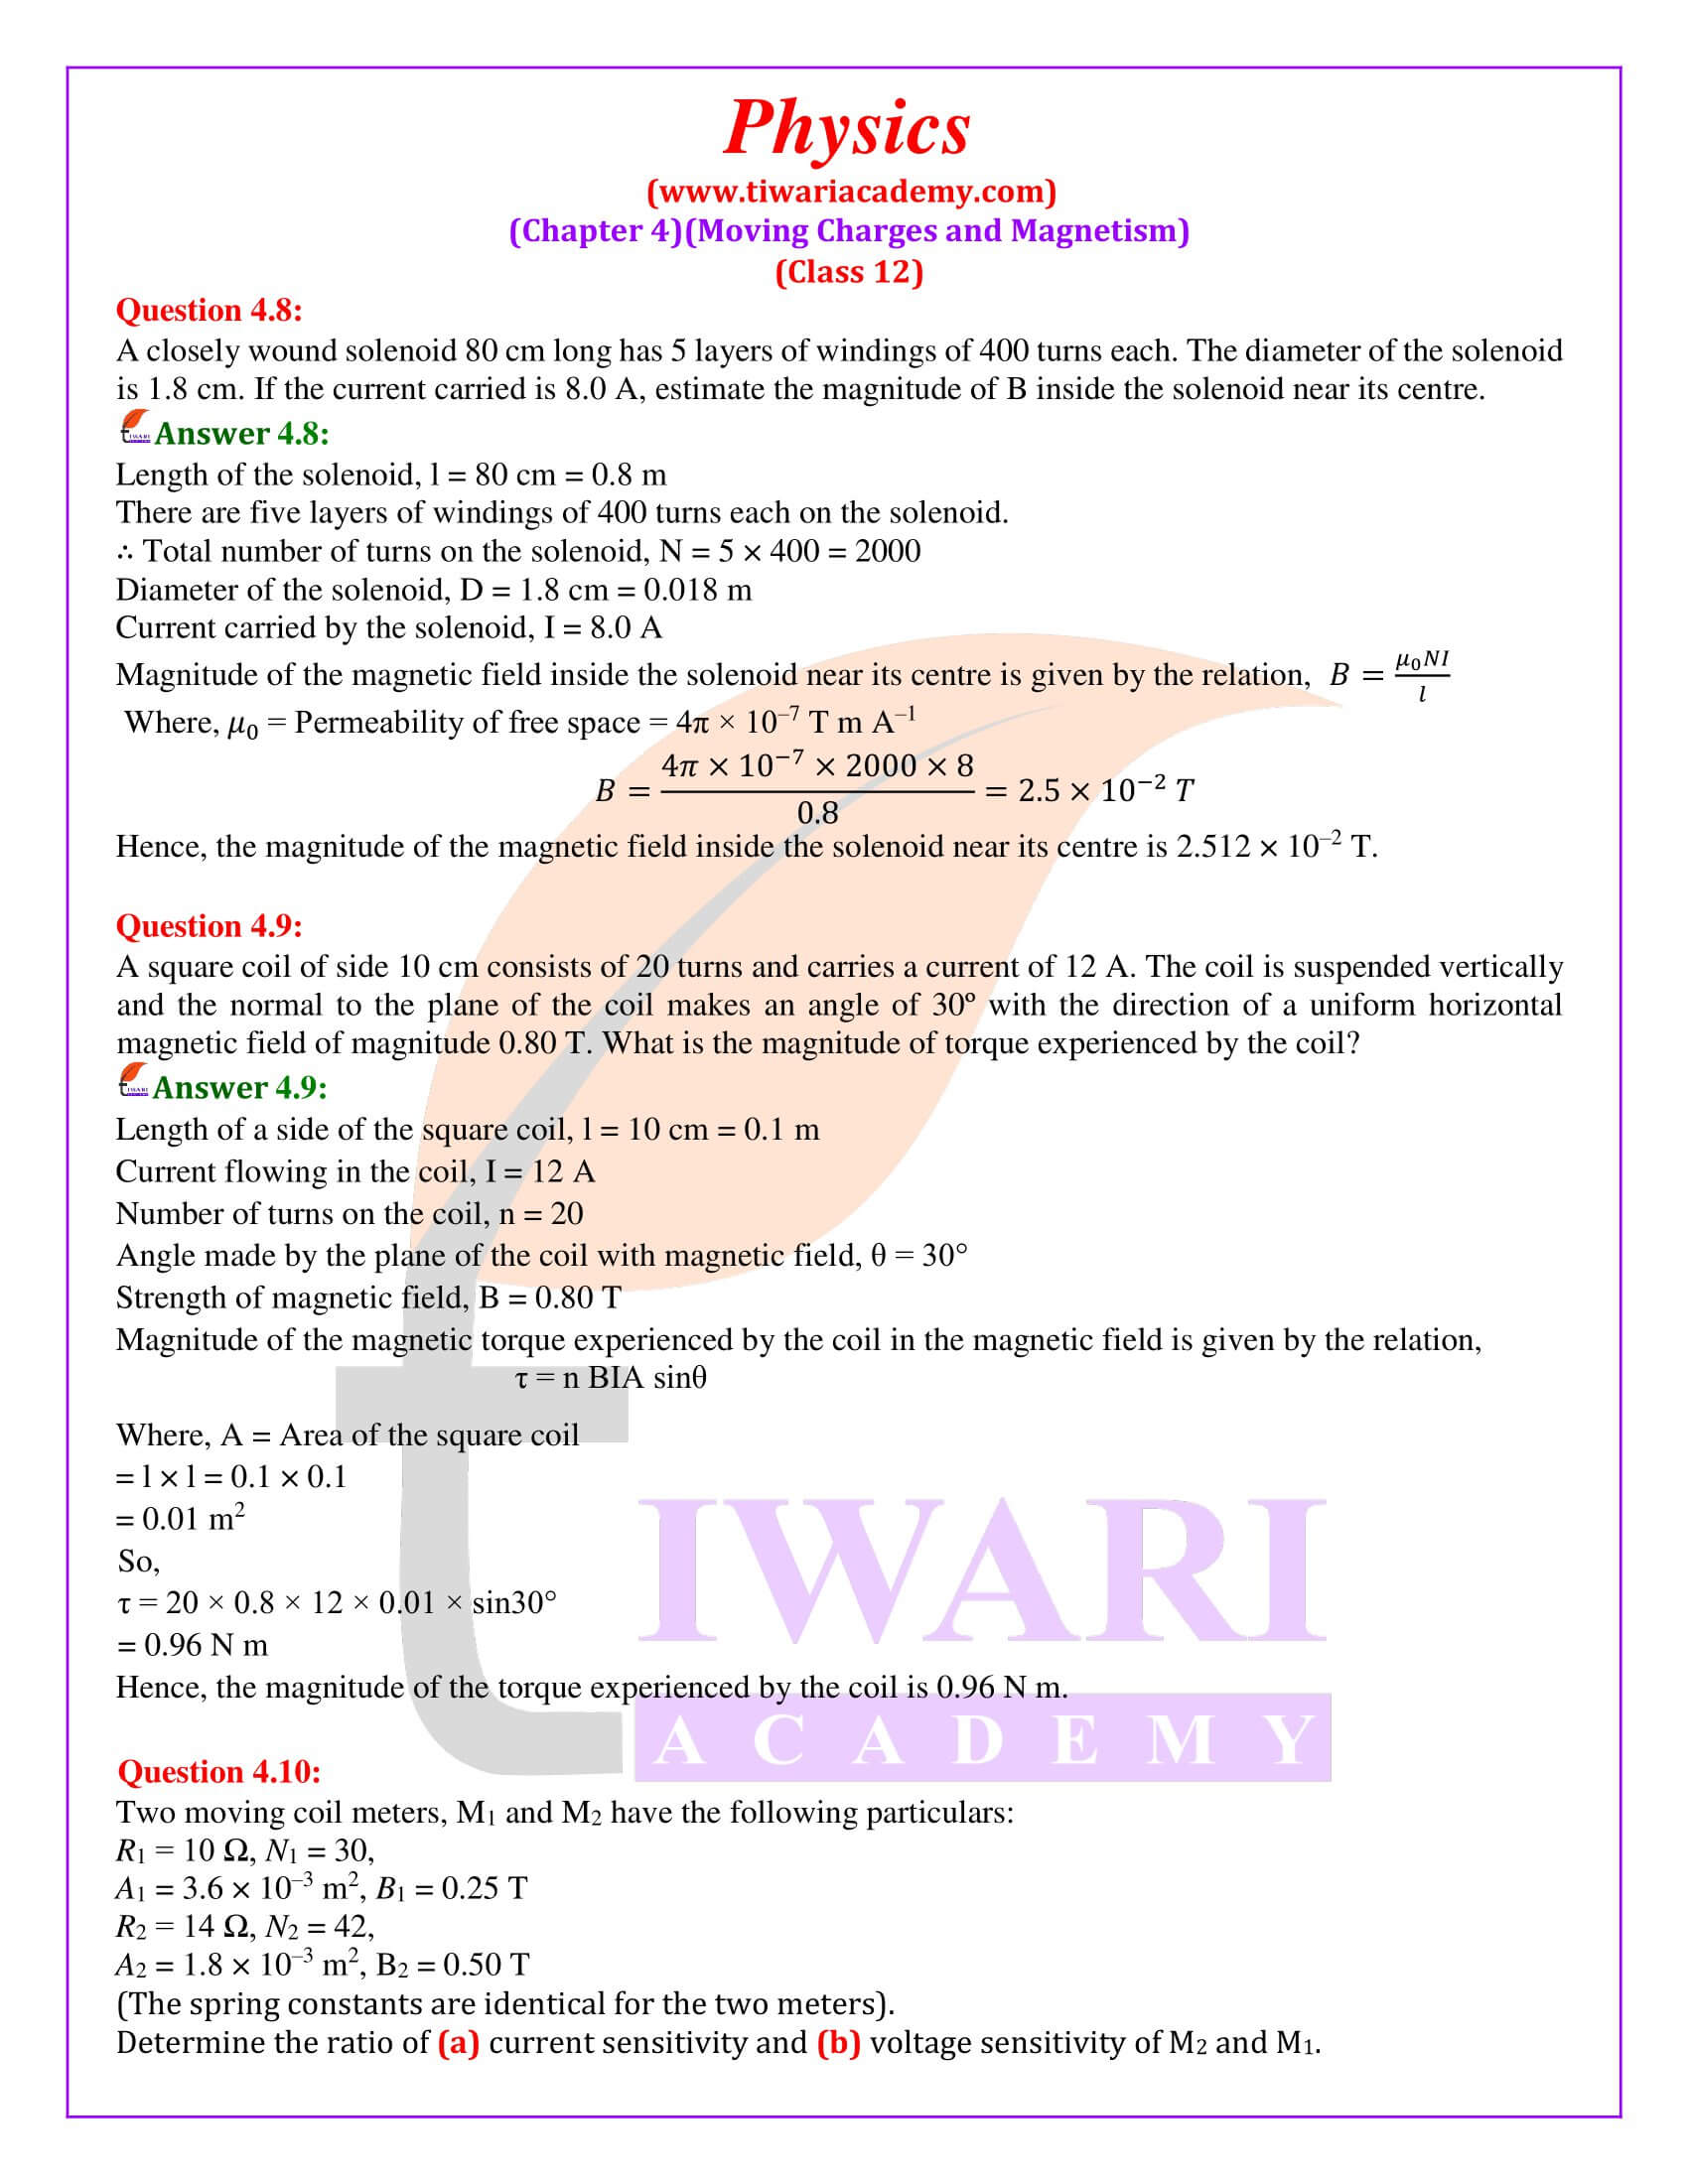 NCERT Solutions for Class 12 Physics Chapter 4 in English Medium